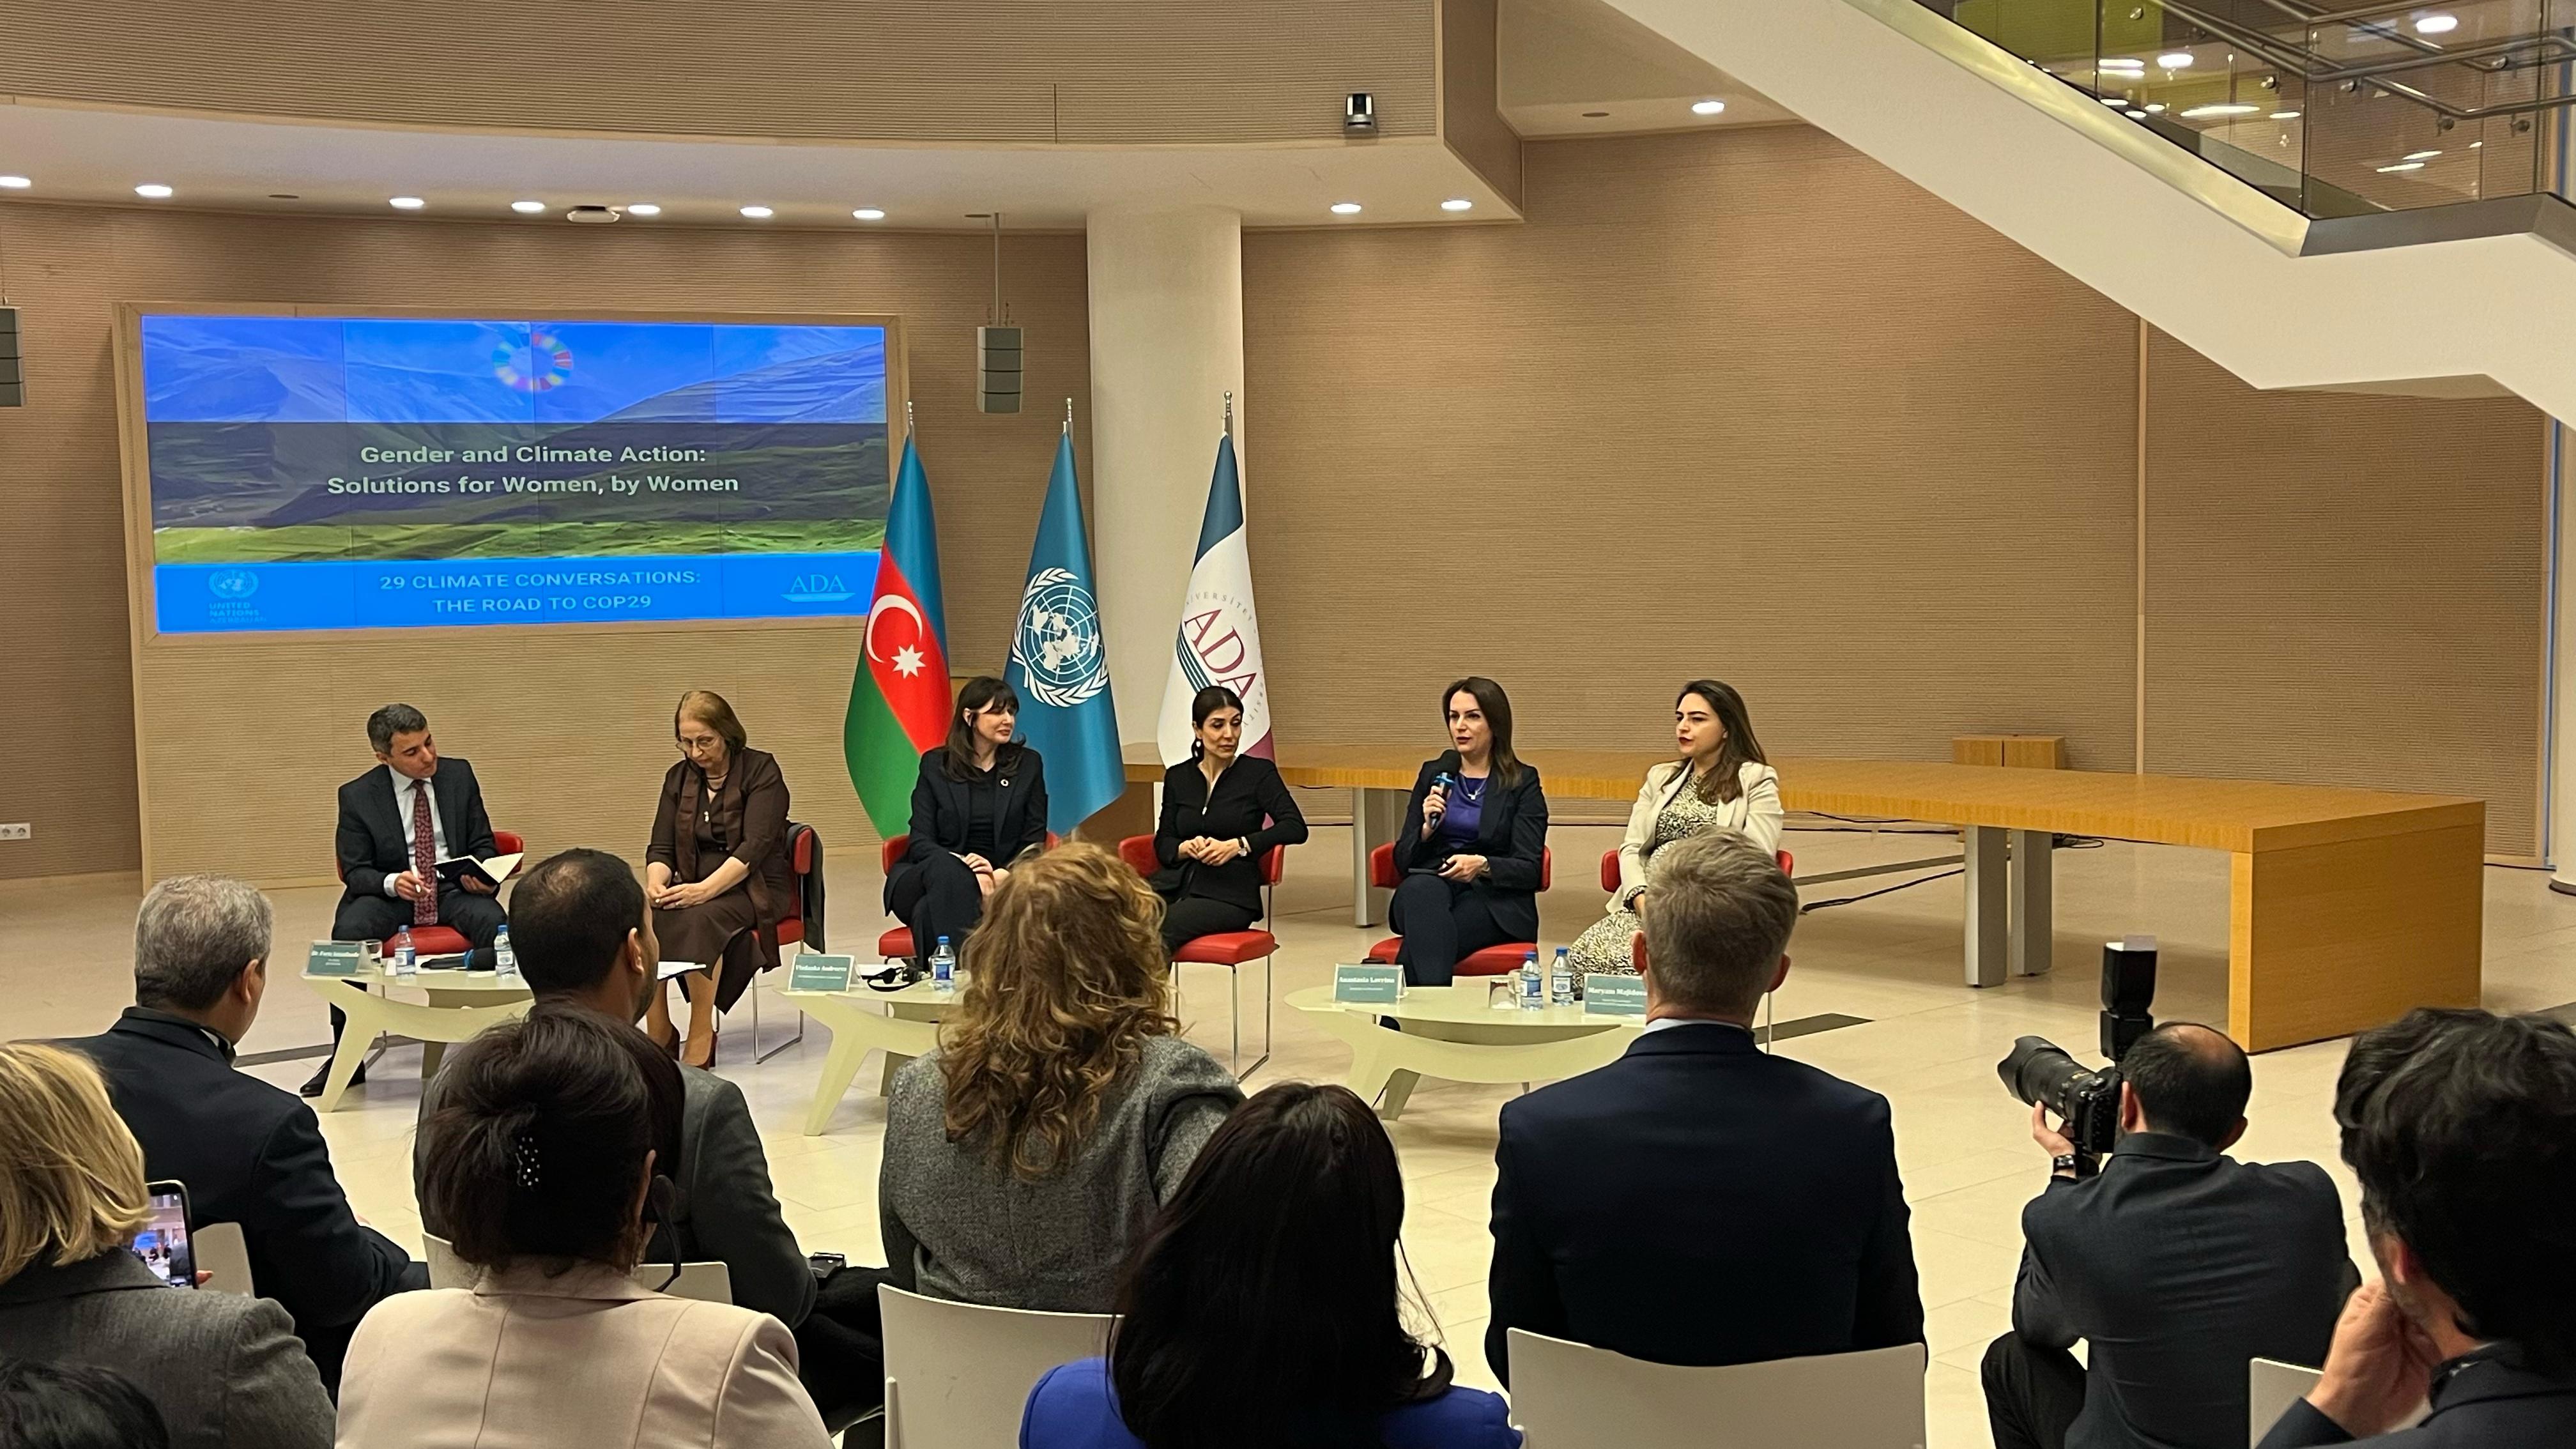 IDD hosts "Gender and Climate Action: Solutions for Women by Women" discussions at ADA University - PHOTOS